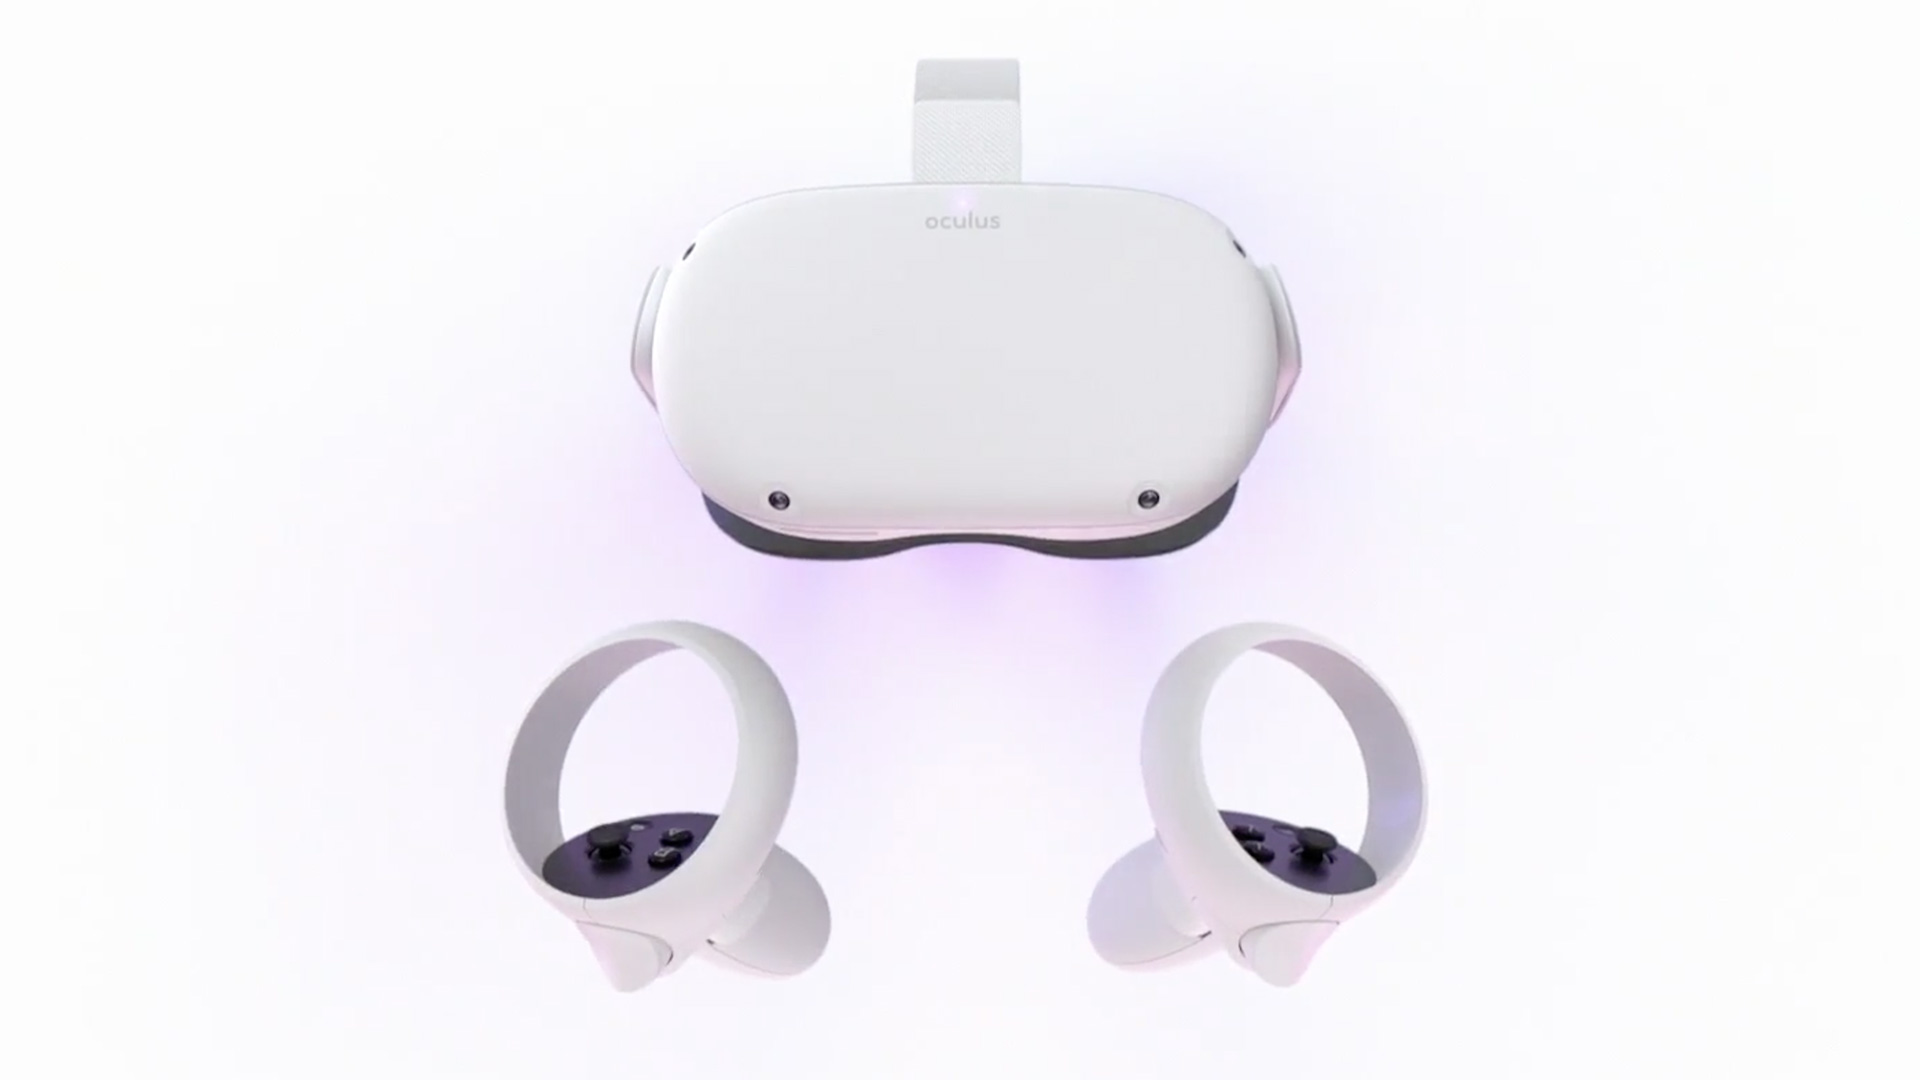 oculus quest 2 vr headset touch controllers